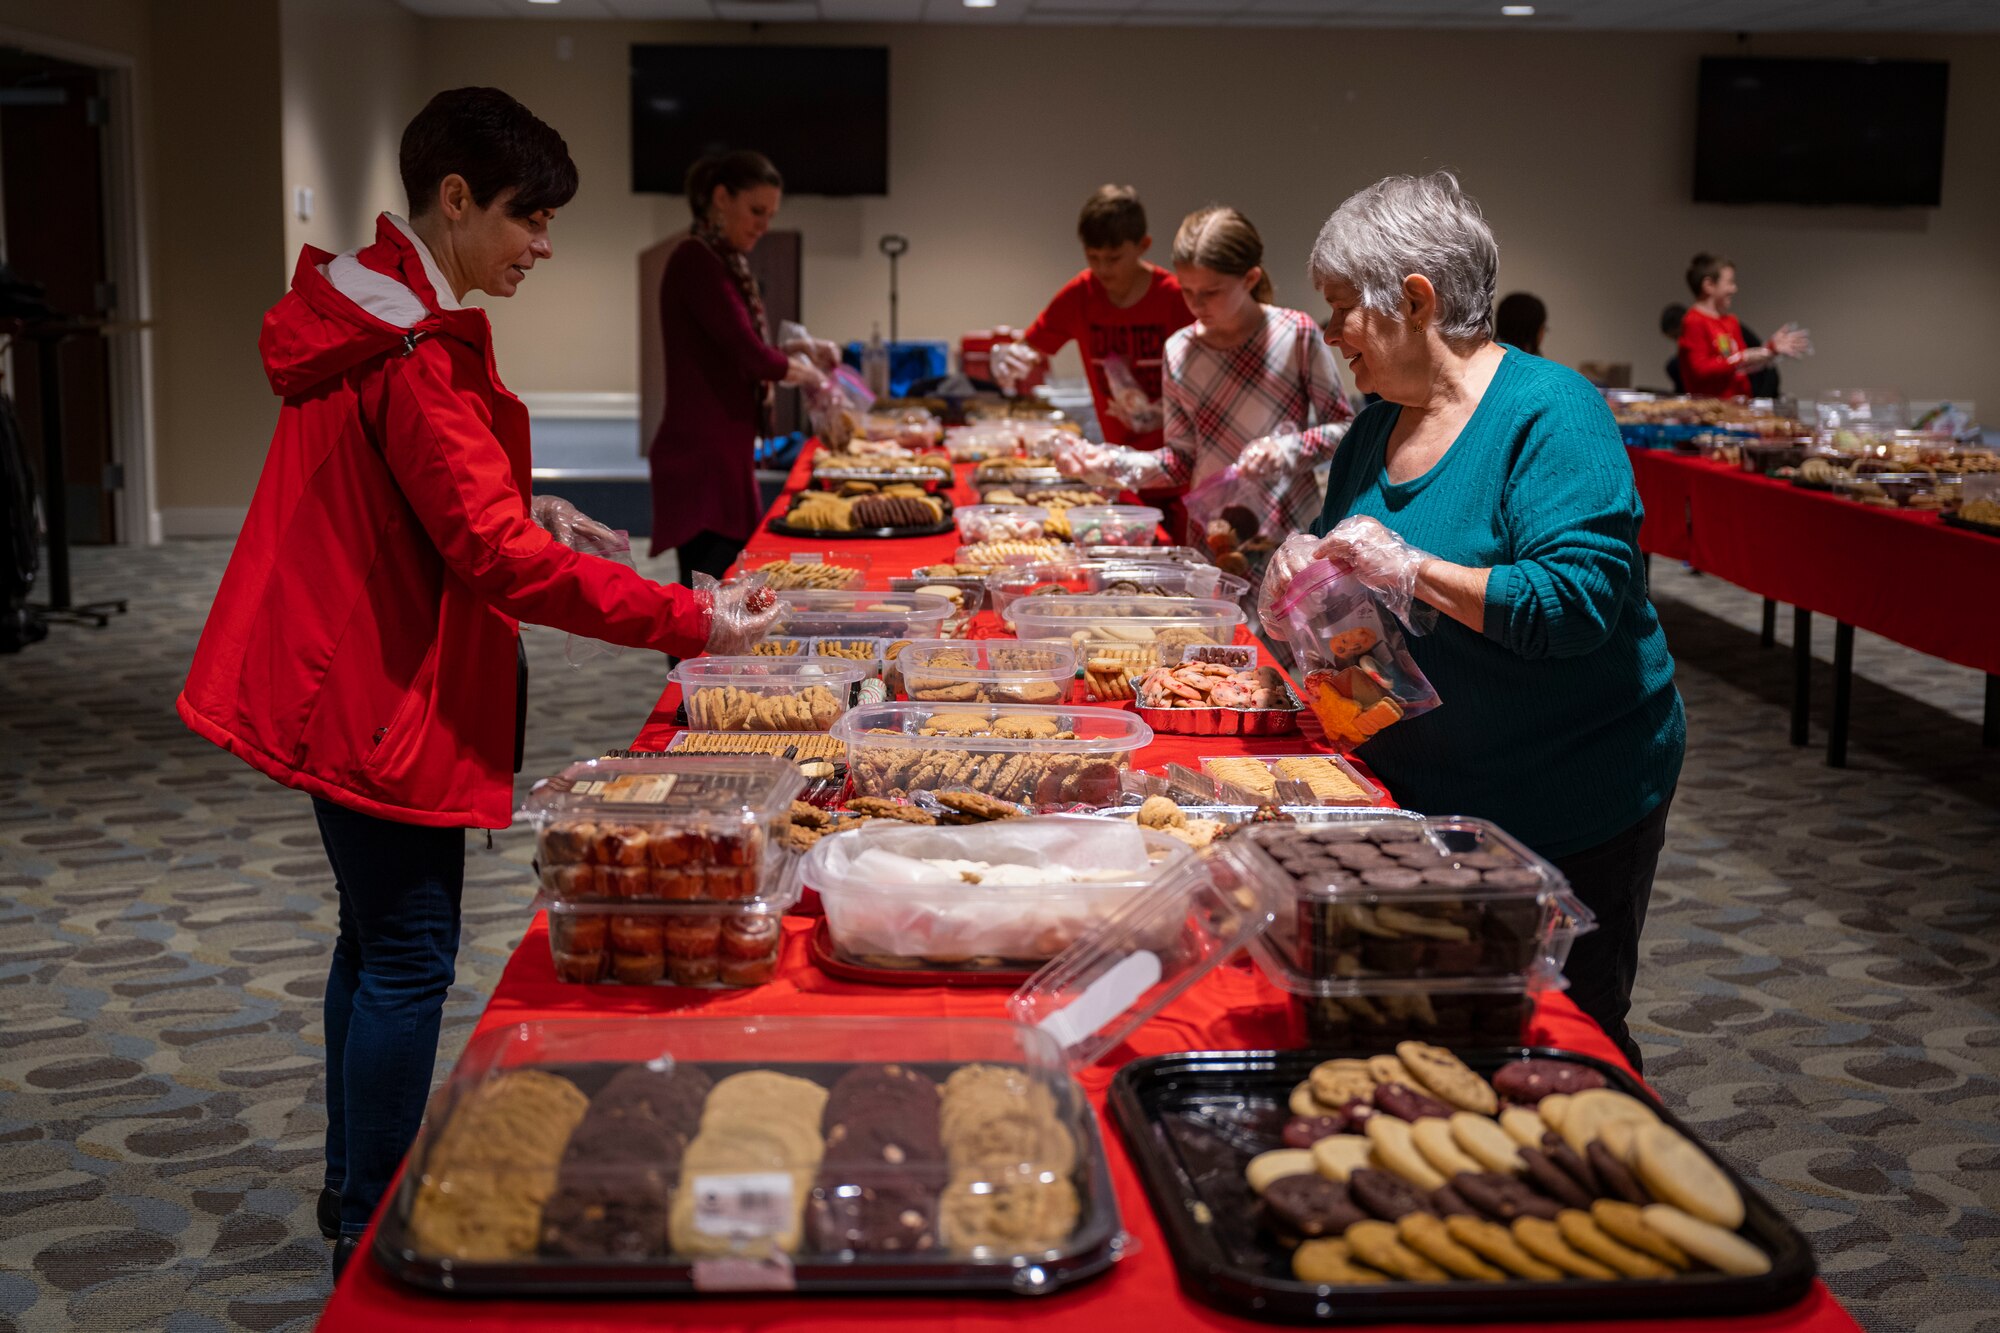 Members from the Goldsboro community prepare cookie bags for dorm Airmen as part of the annual cookie drive at Seymour Johnson Air Force Base, North Carolina, Dec. 4, 2022. The cookies were donated by members of the local community and delivered to 4th Fighter Wing dorm Airmen Dec. 5.